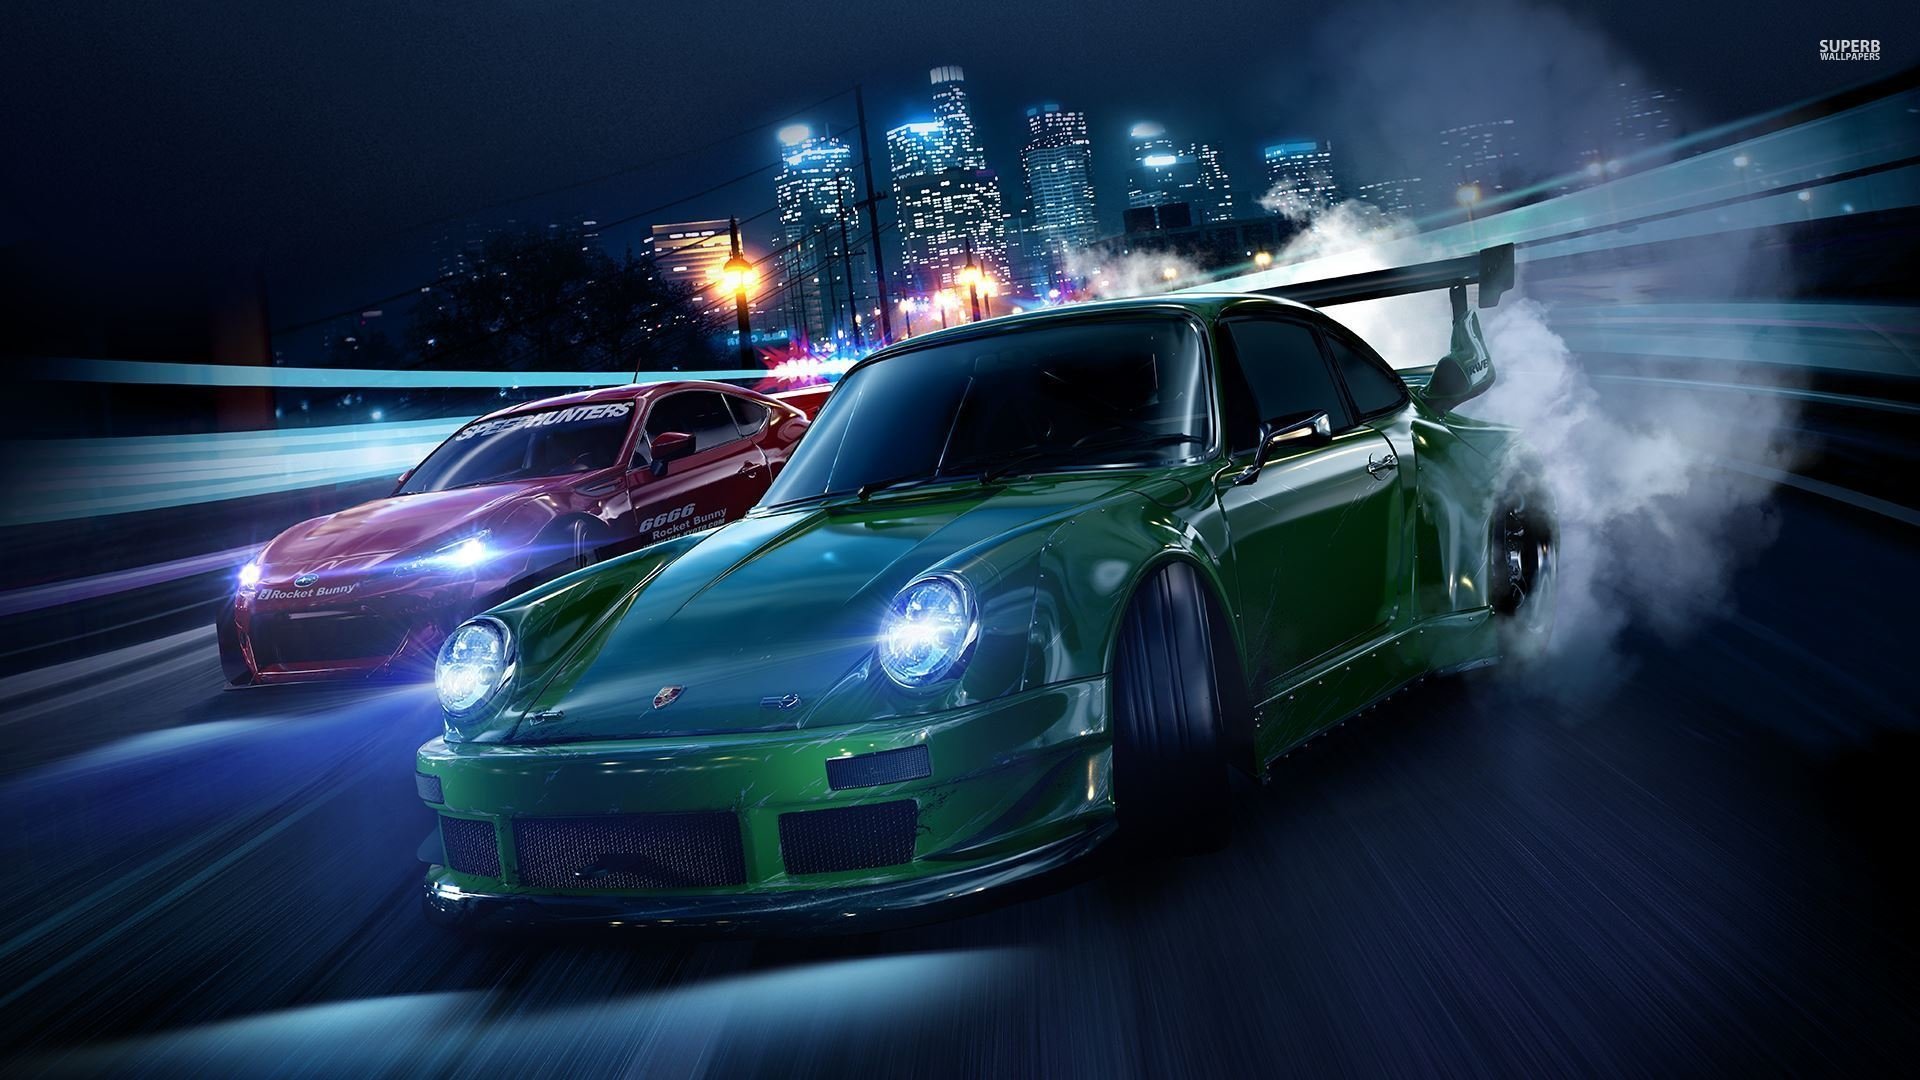 Need for speed wallpapers